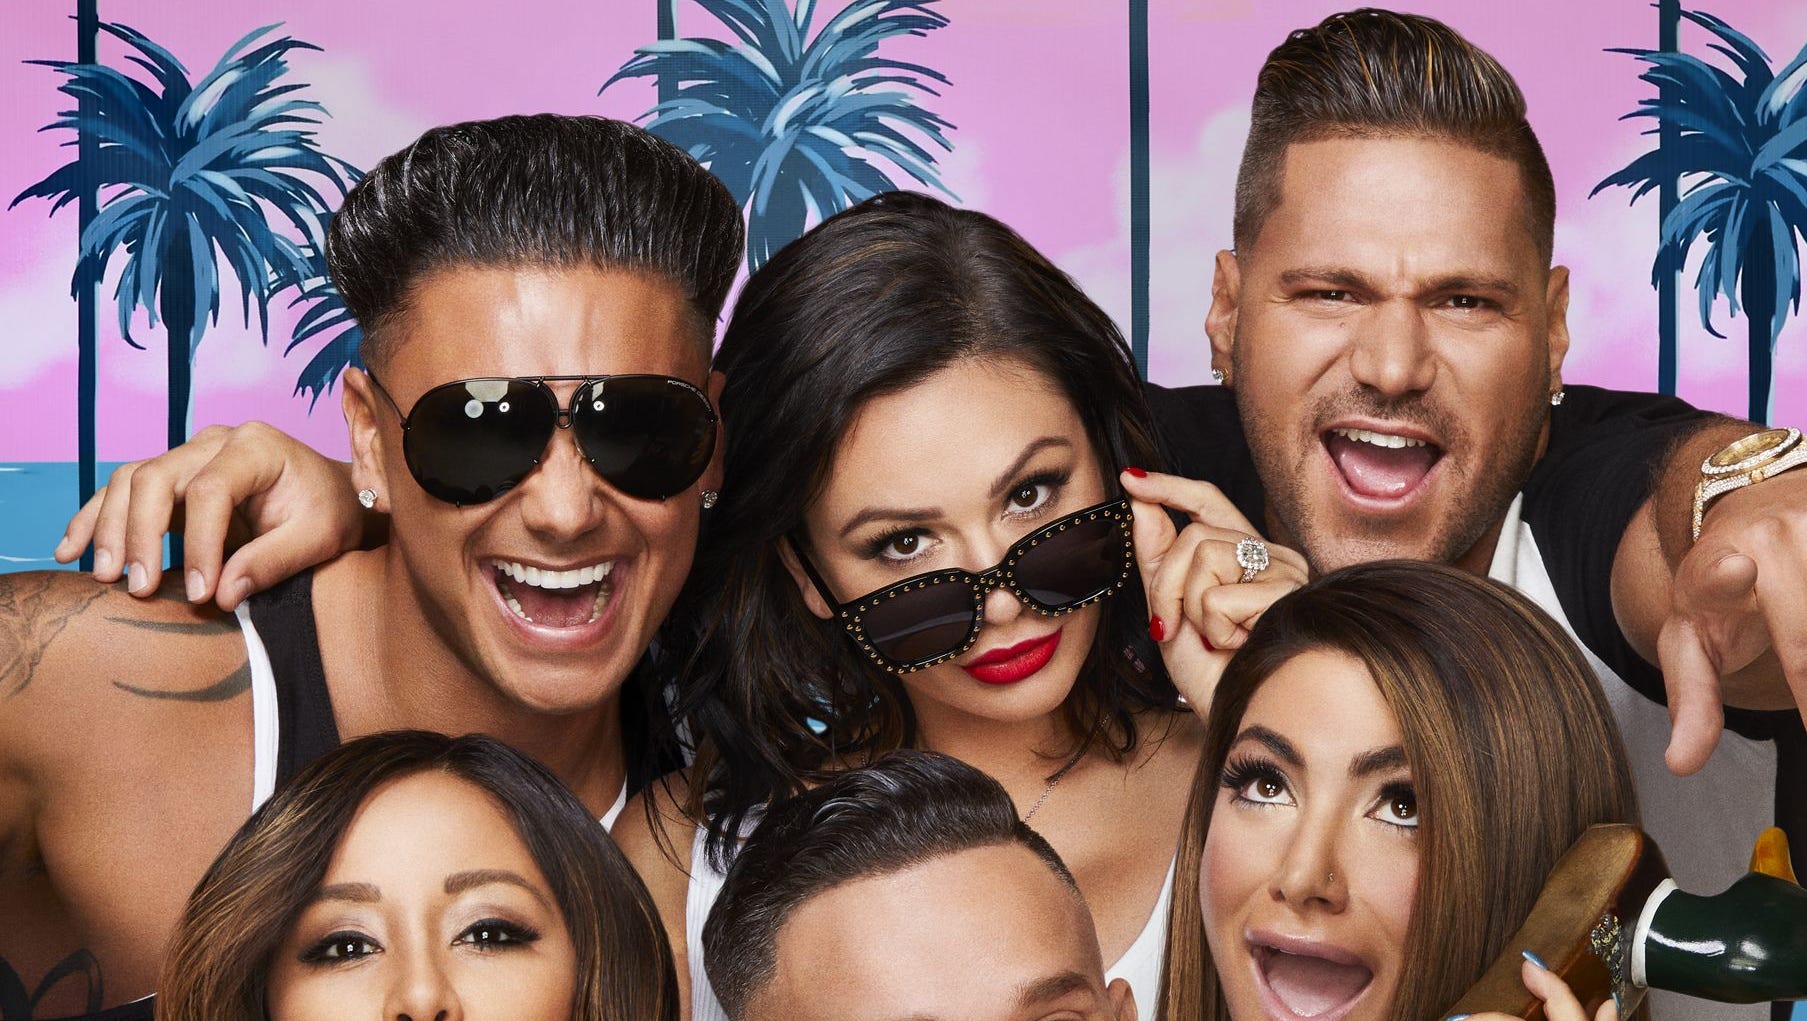 MTV's 'Jersey Shore' reunion is a blast in a glass